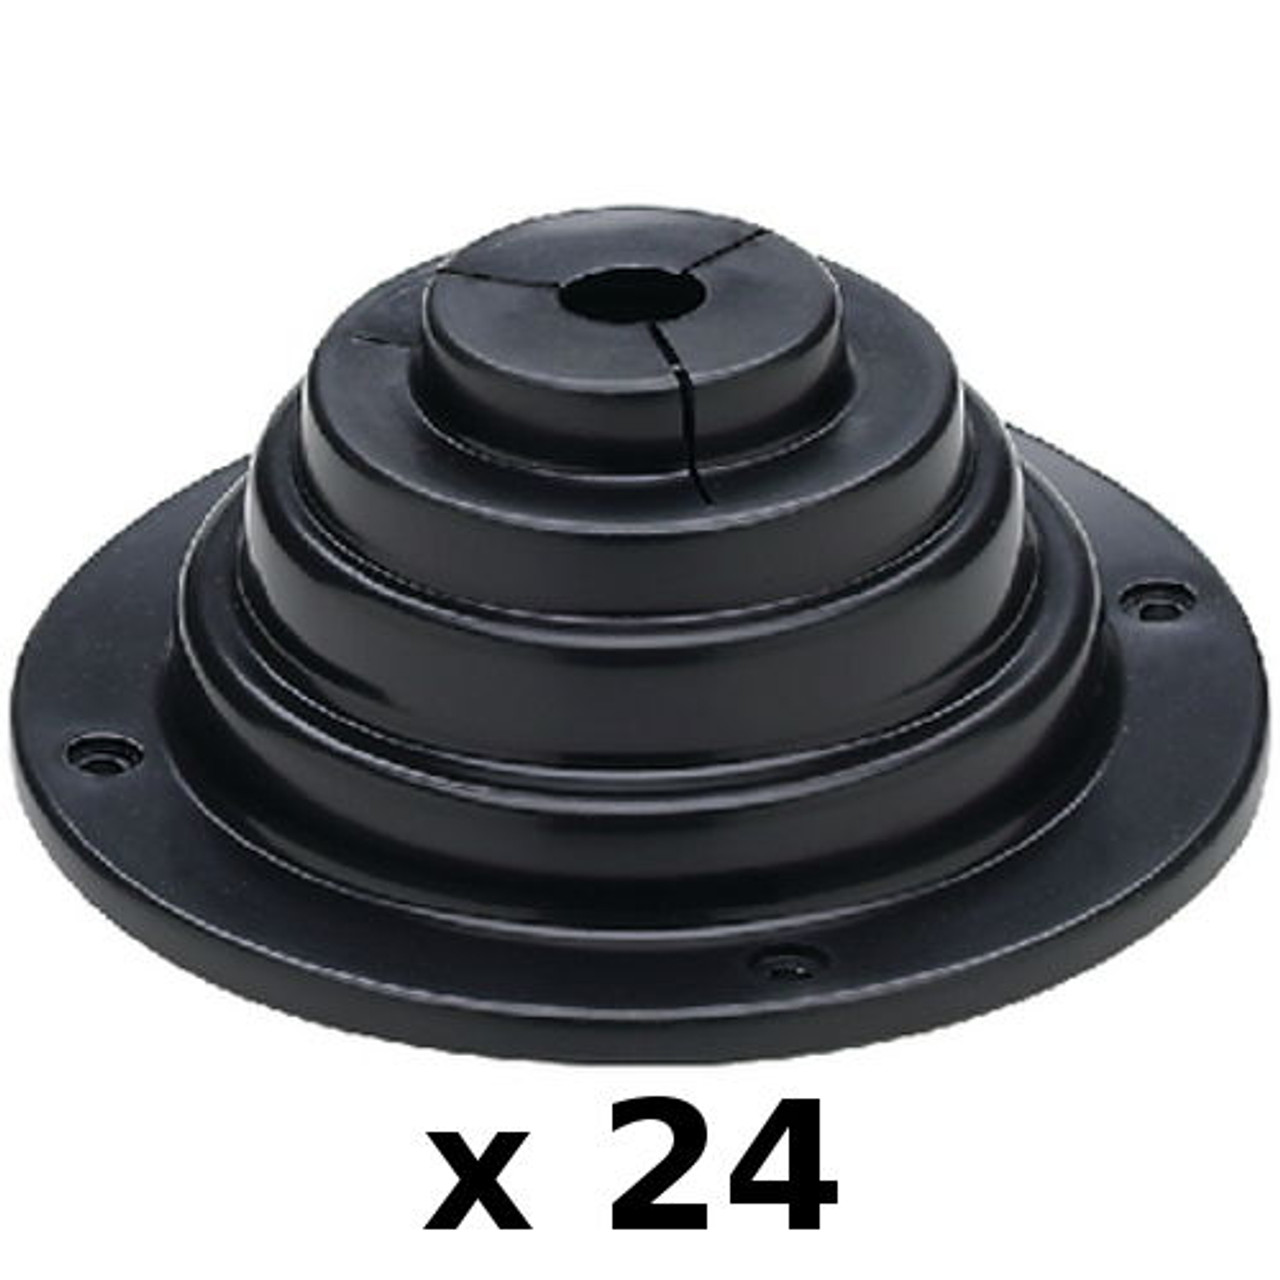 24 Pack 4 Inch Motorwell Rigging and Cable Boot for Boats - Rigging Hole Cover